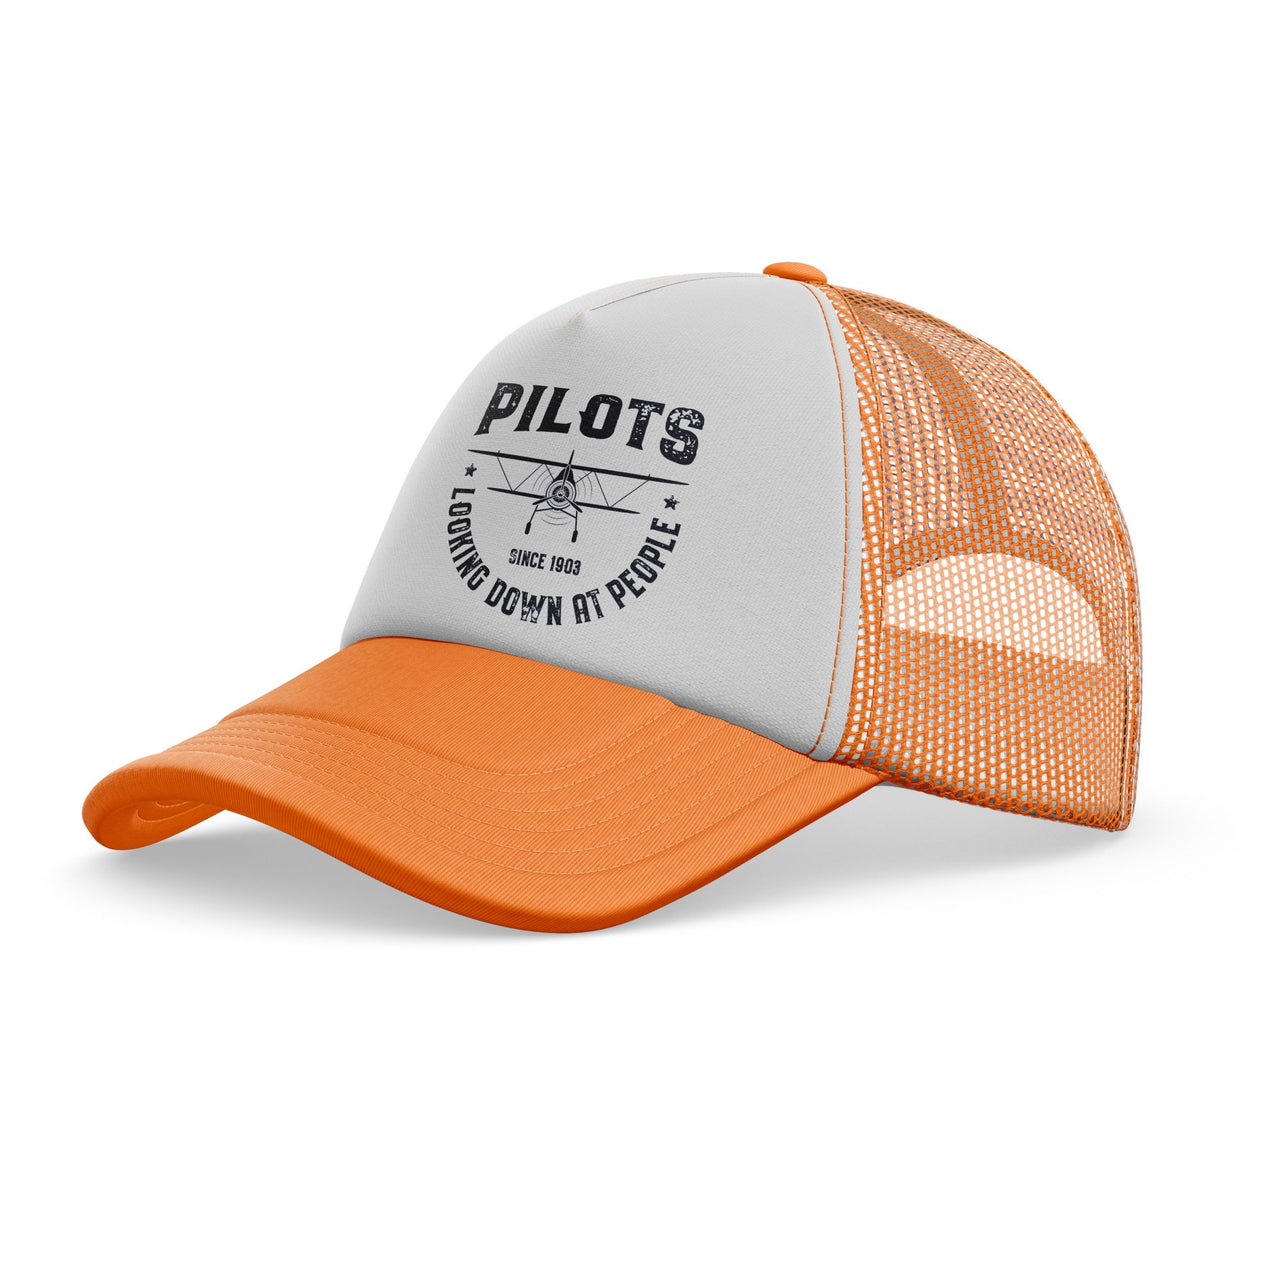 Pilots Looking Down at People Since 1903 Designed Trucker Caps & Hats